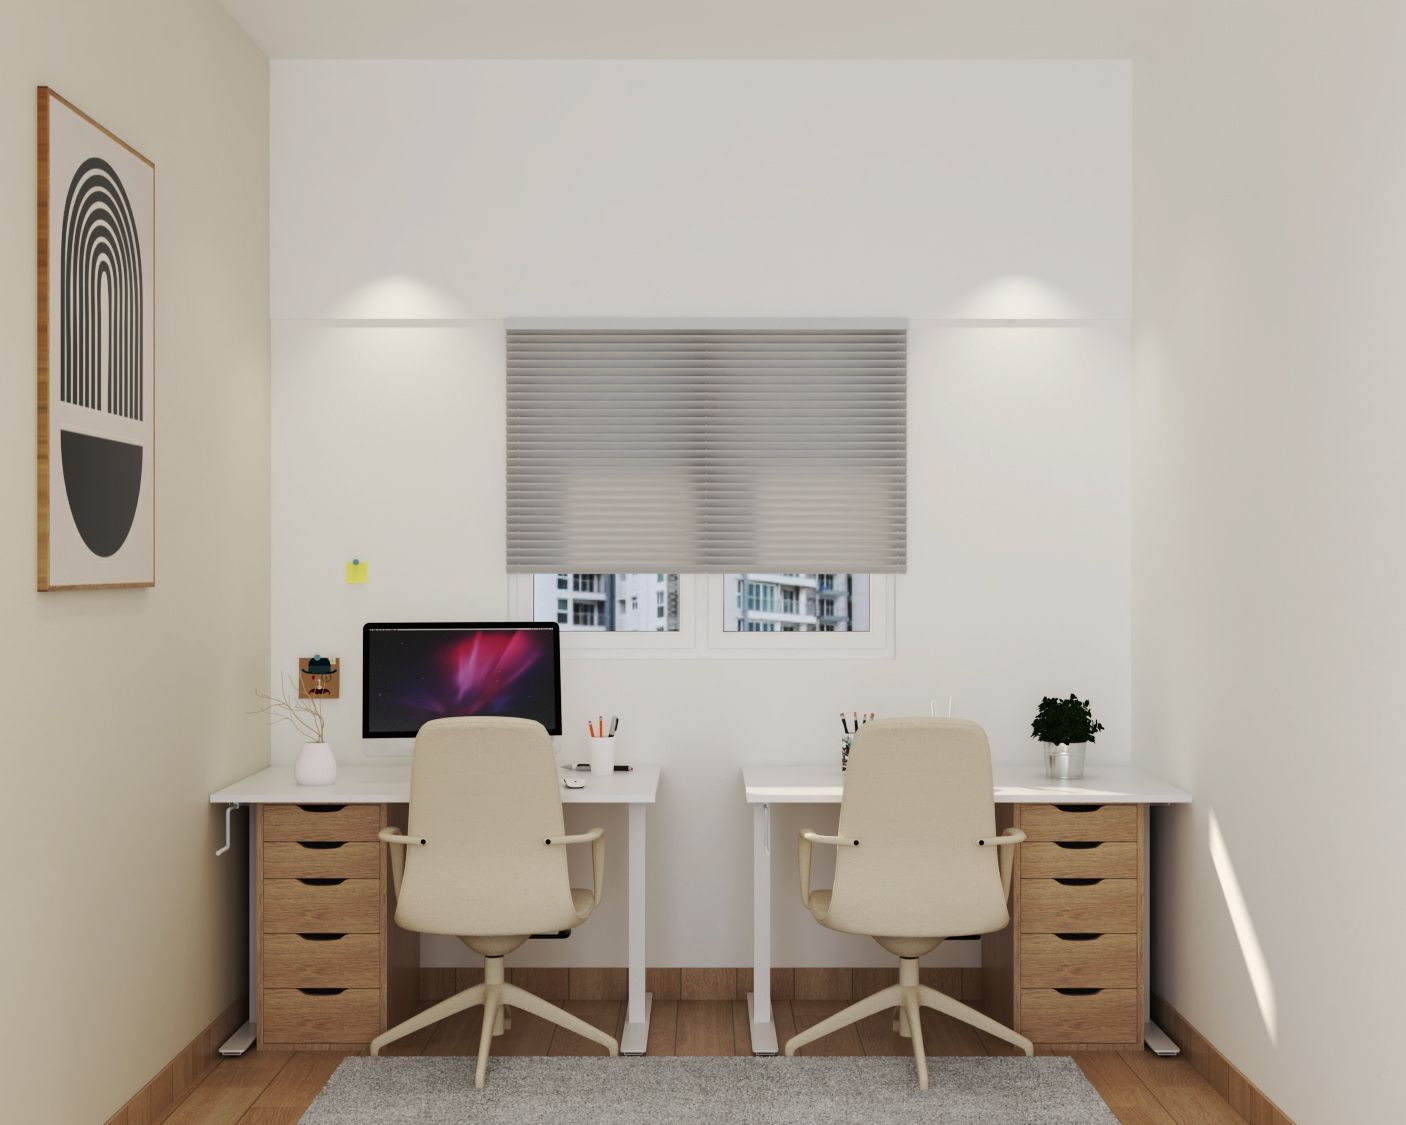 Contemporary Home Office Design With 2 Study Tables With Drawers